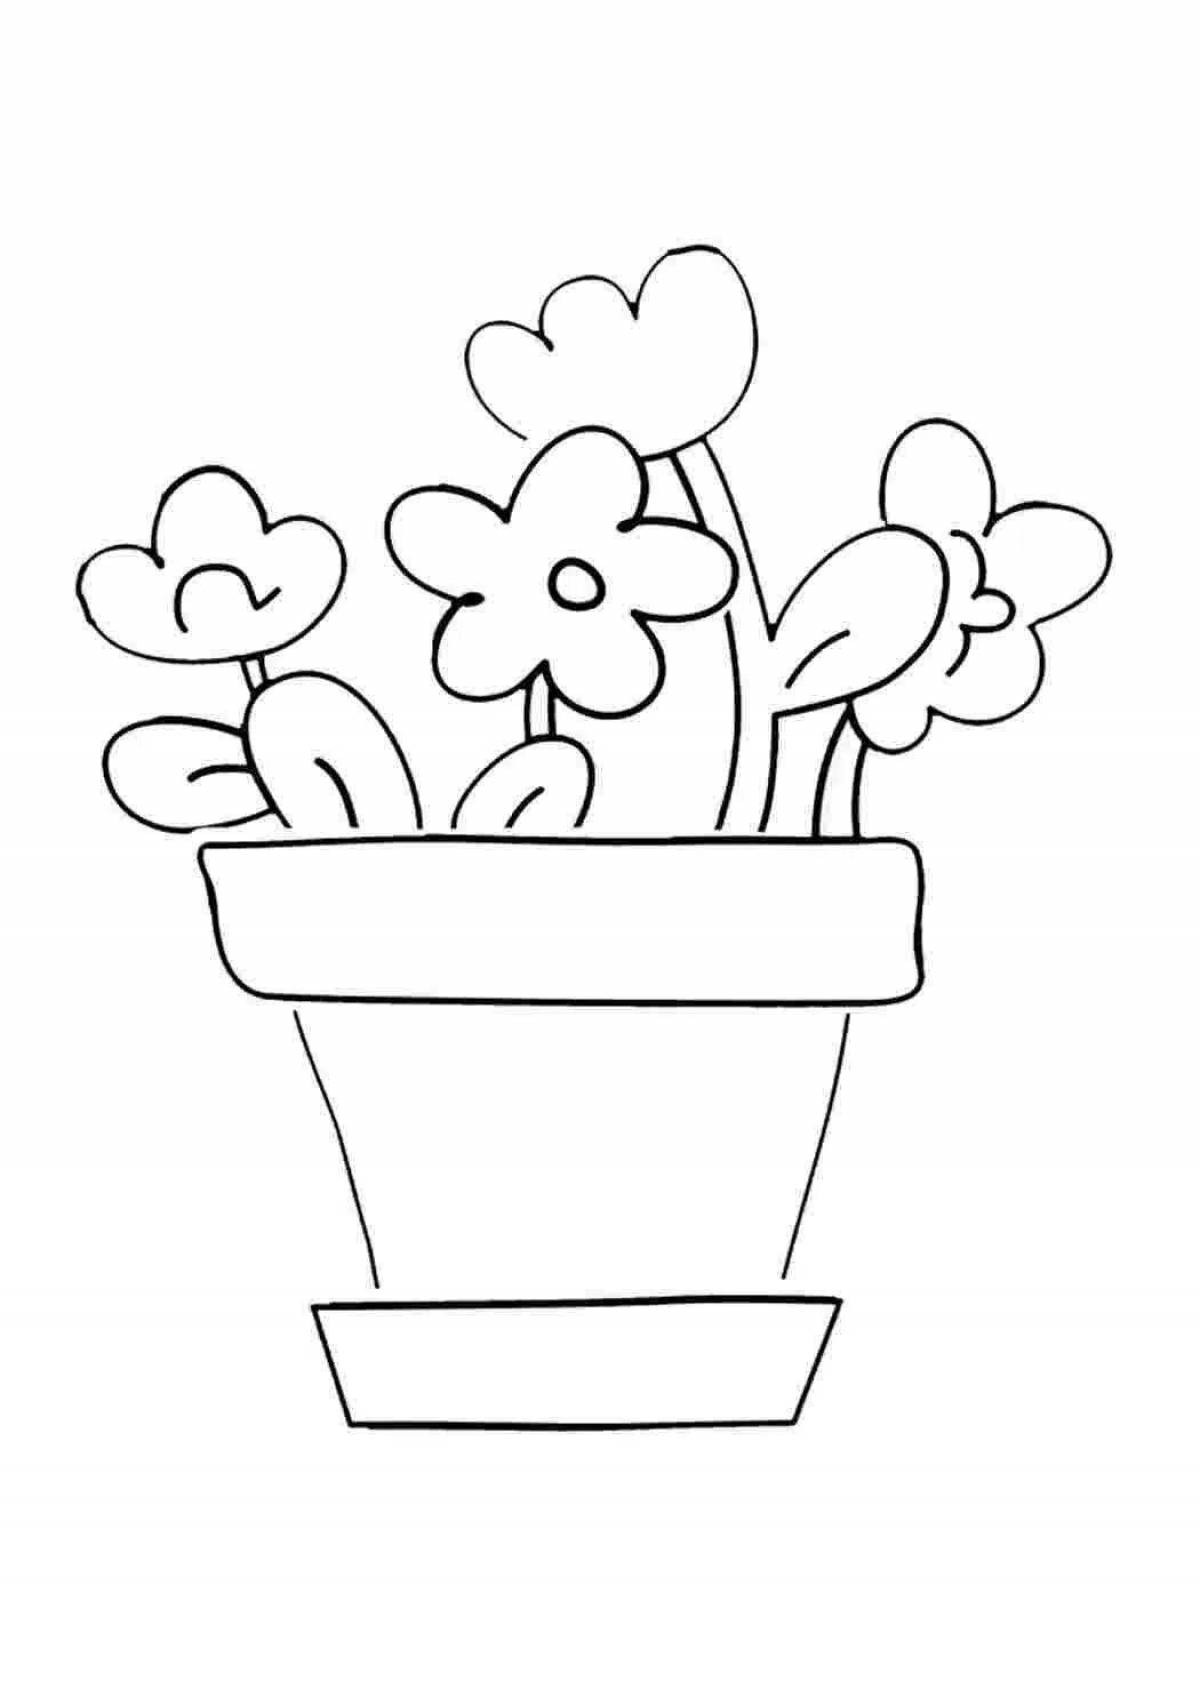 Fun flower pot coloring page for kids